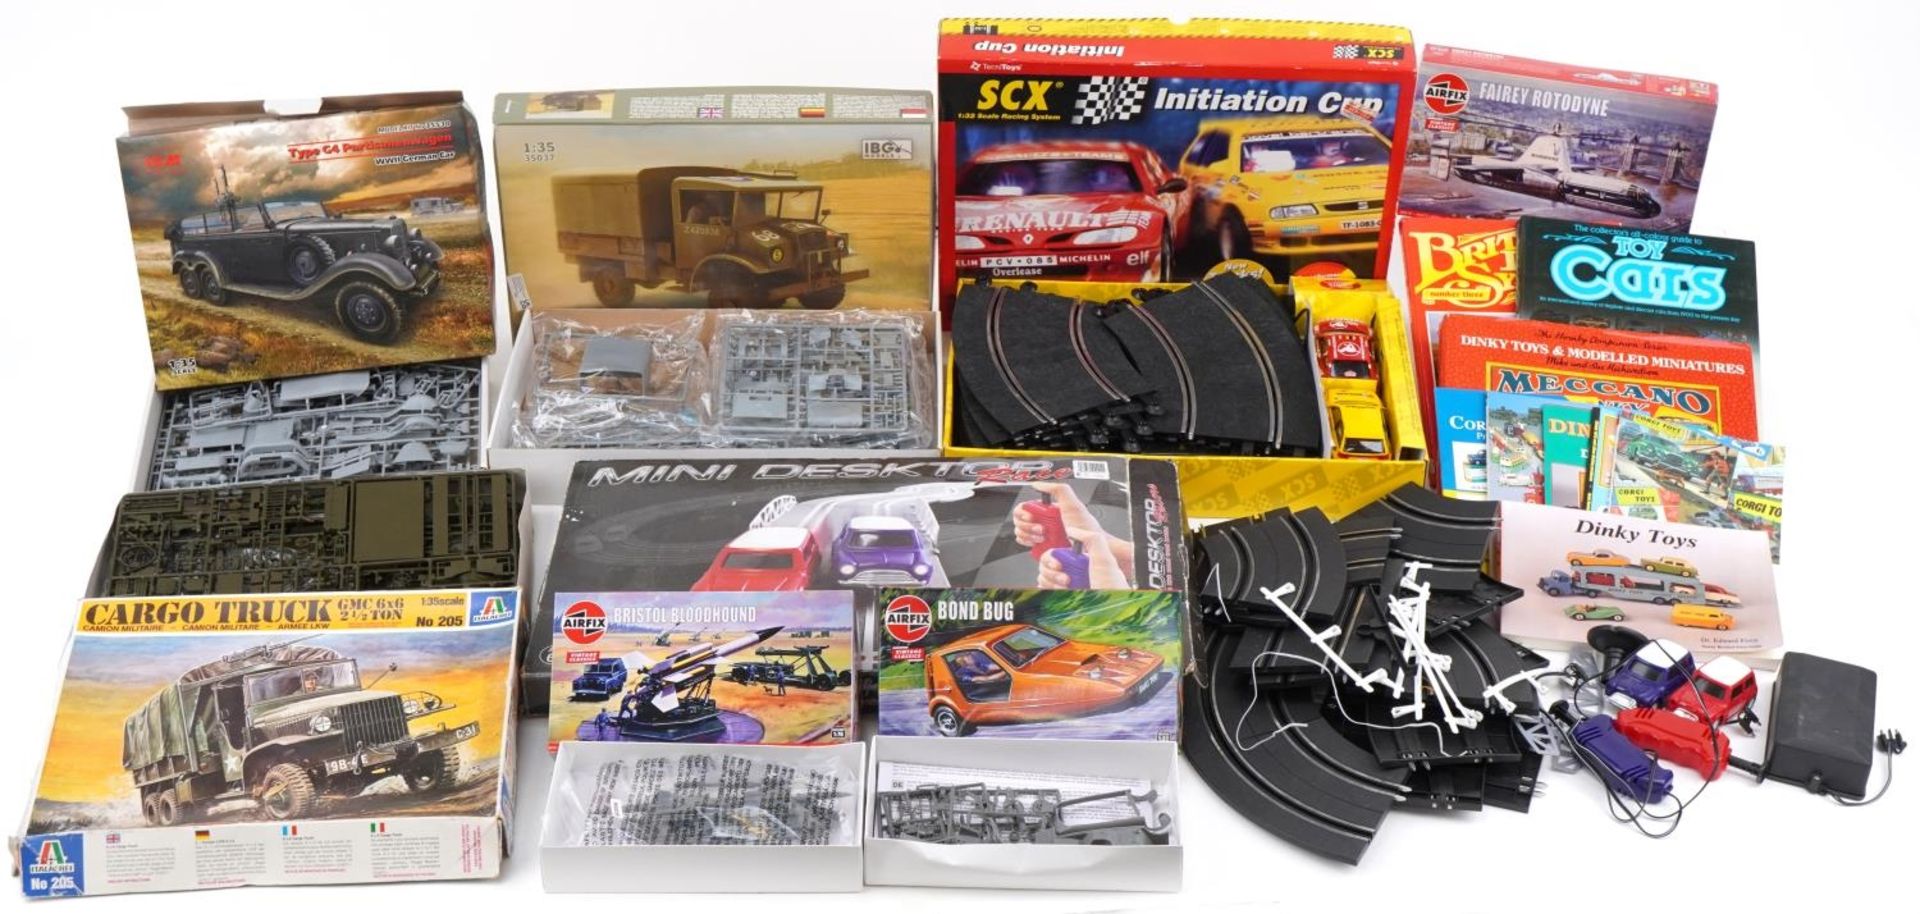 Vintage and later model kits, slot car racing tracks and toy collector's guides including SCX 1:32